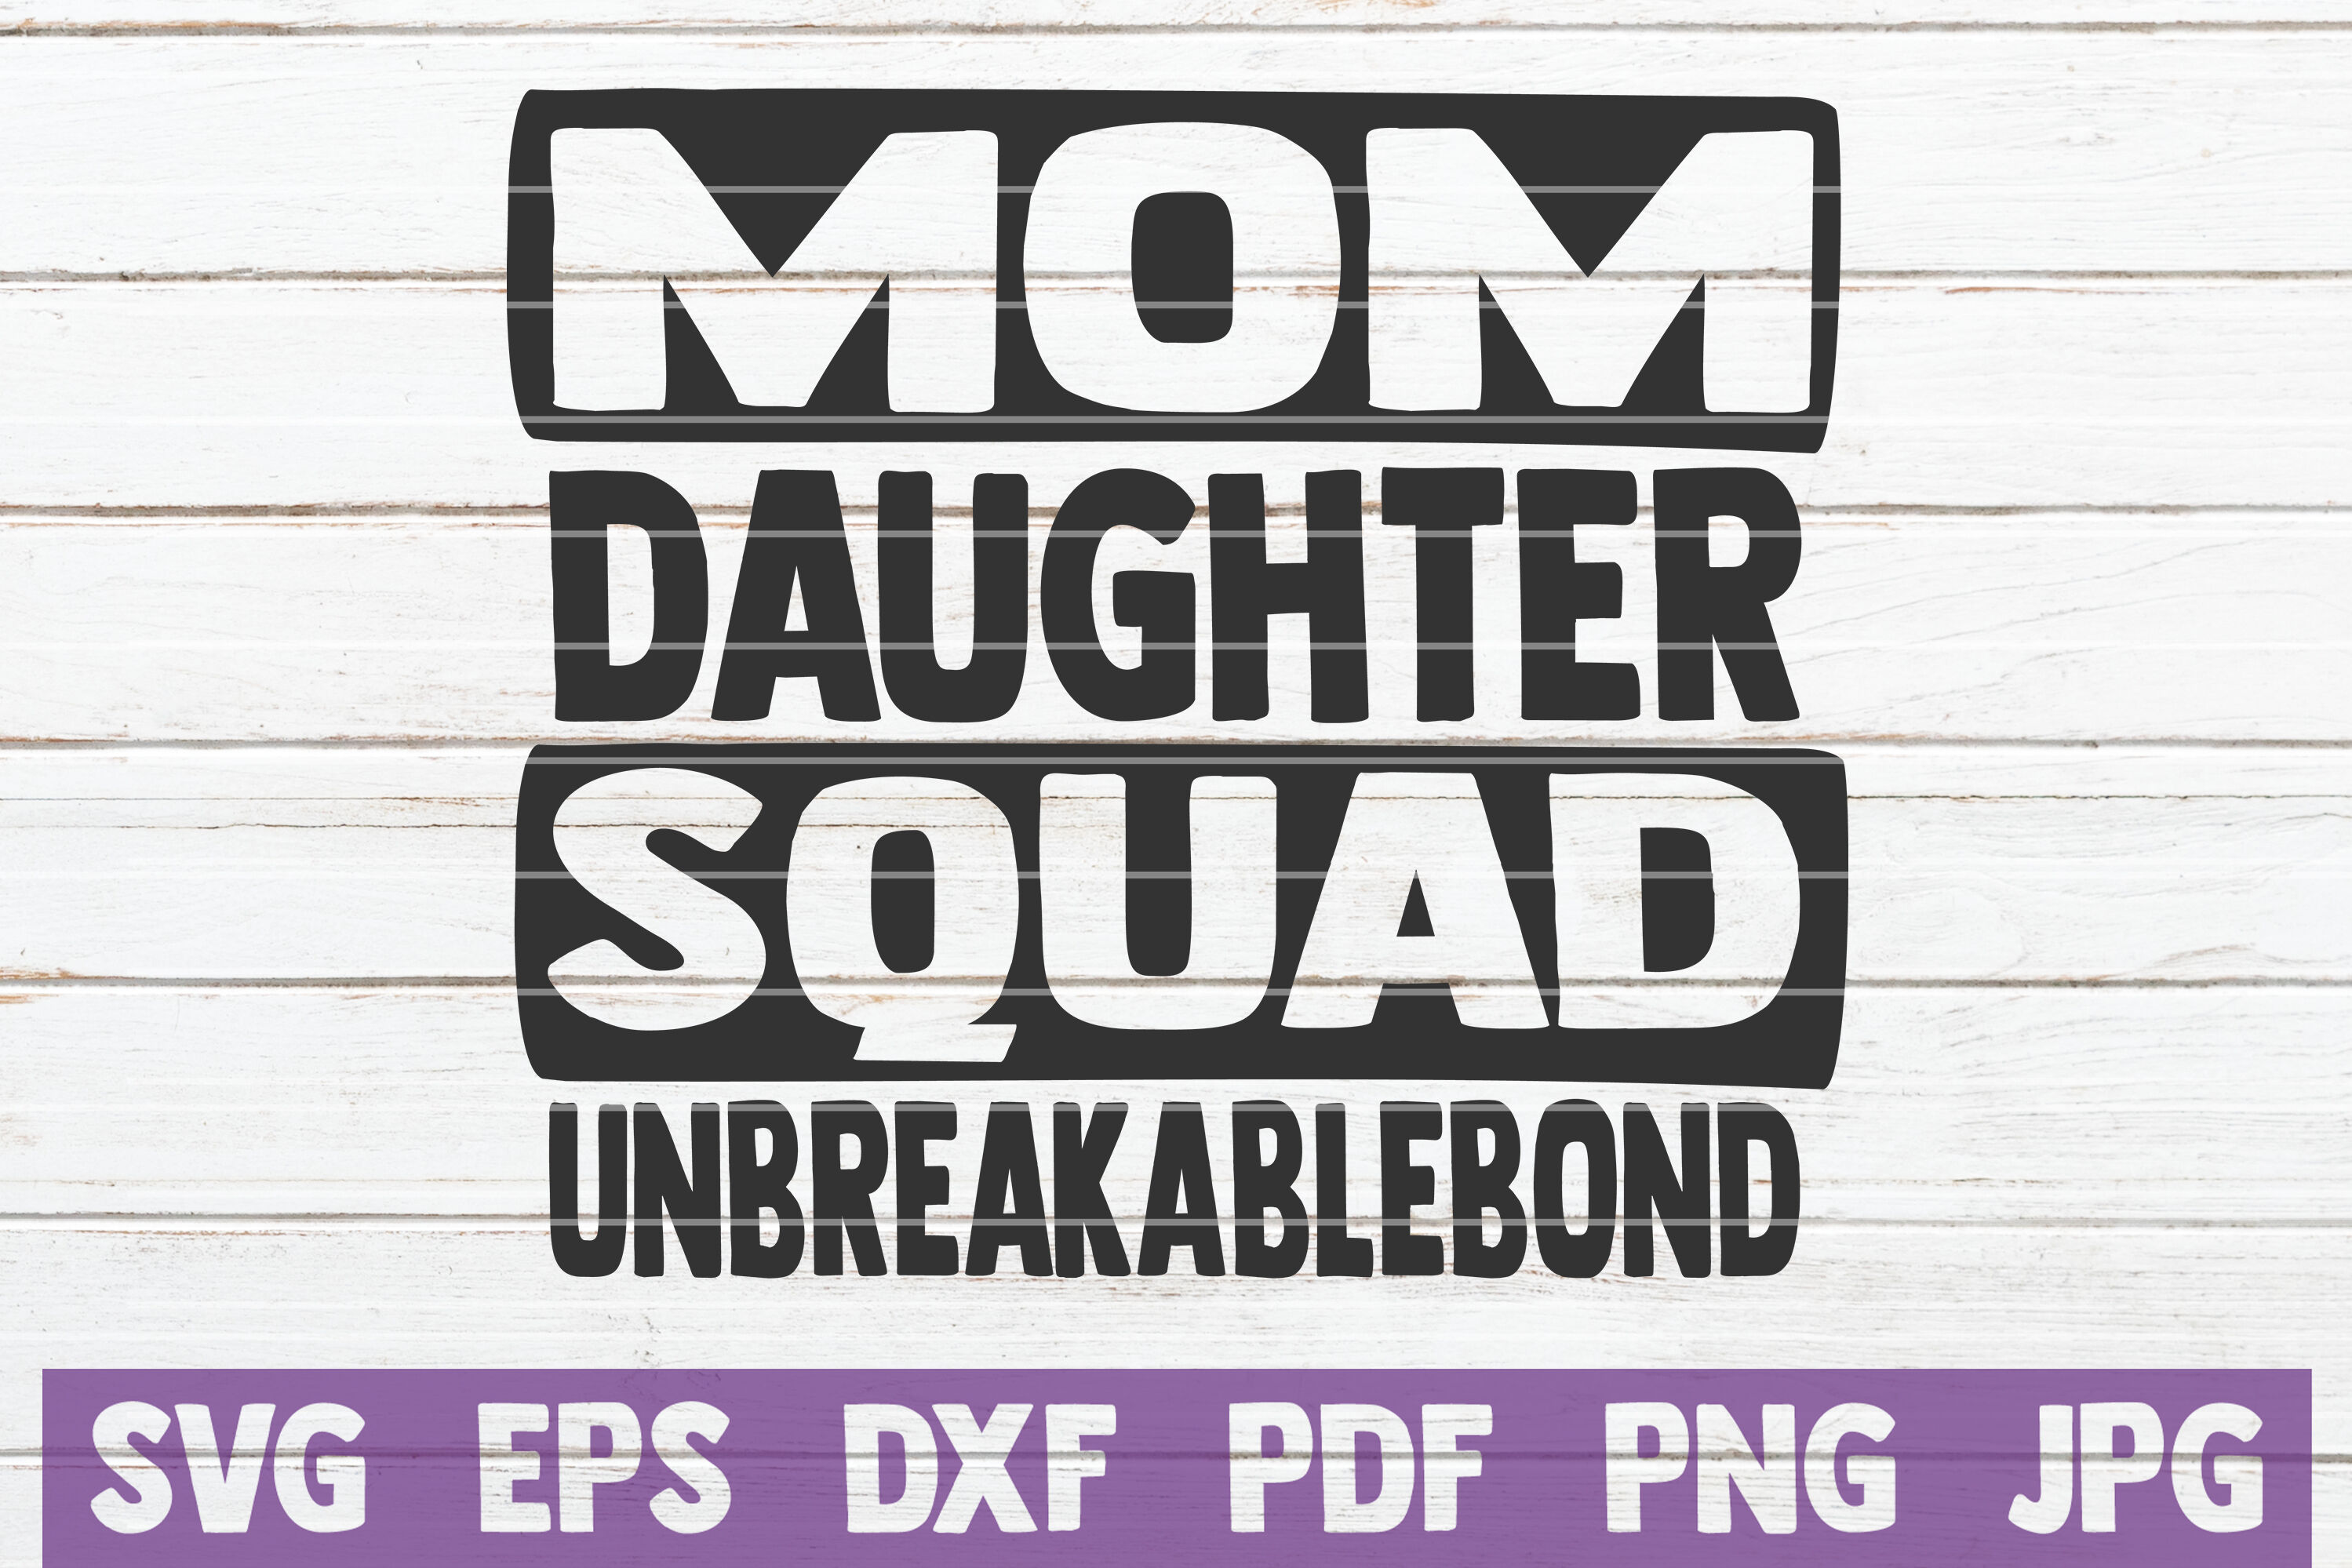 Download Mom Daughter Squad Unbreakable Bond Svg Cut File By Mintymarshmallows Thehungryjpeg Com